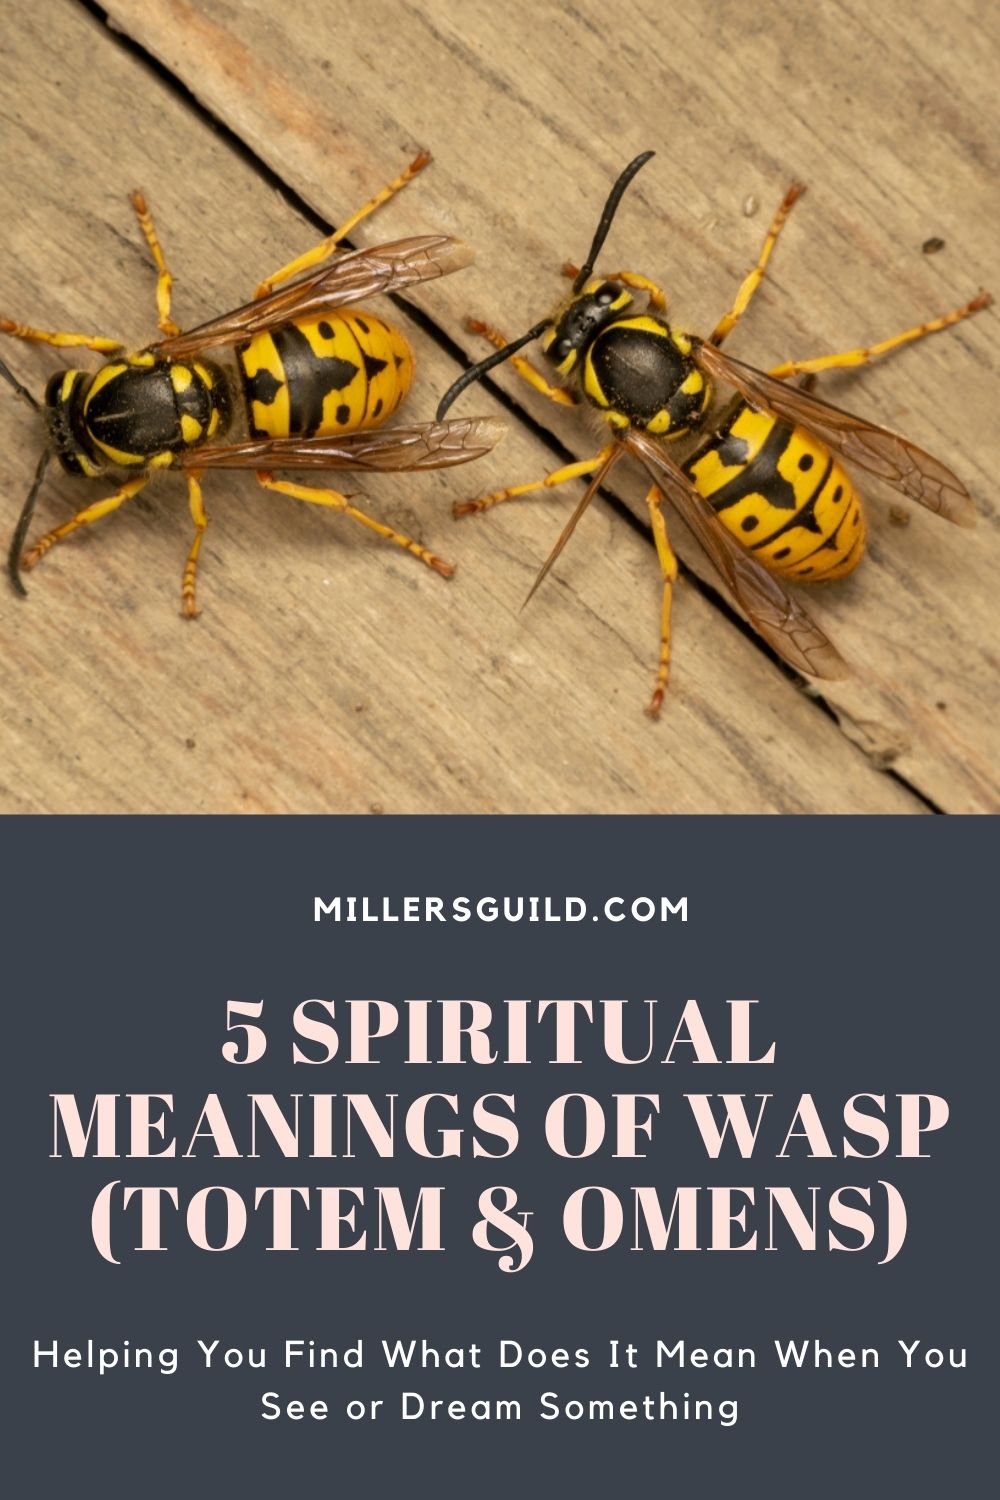 5 Spiritual Meanings of Wasp (Totem & Omens)